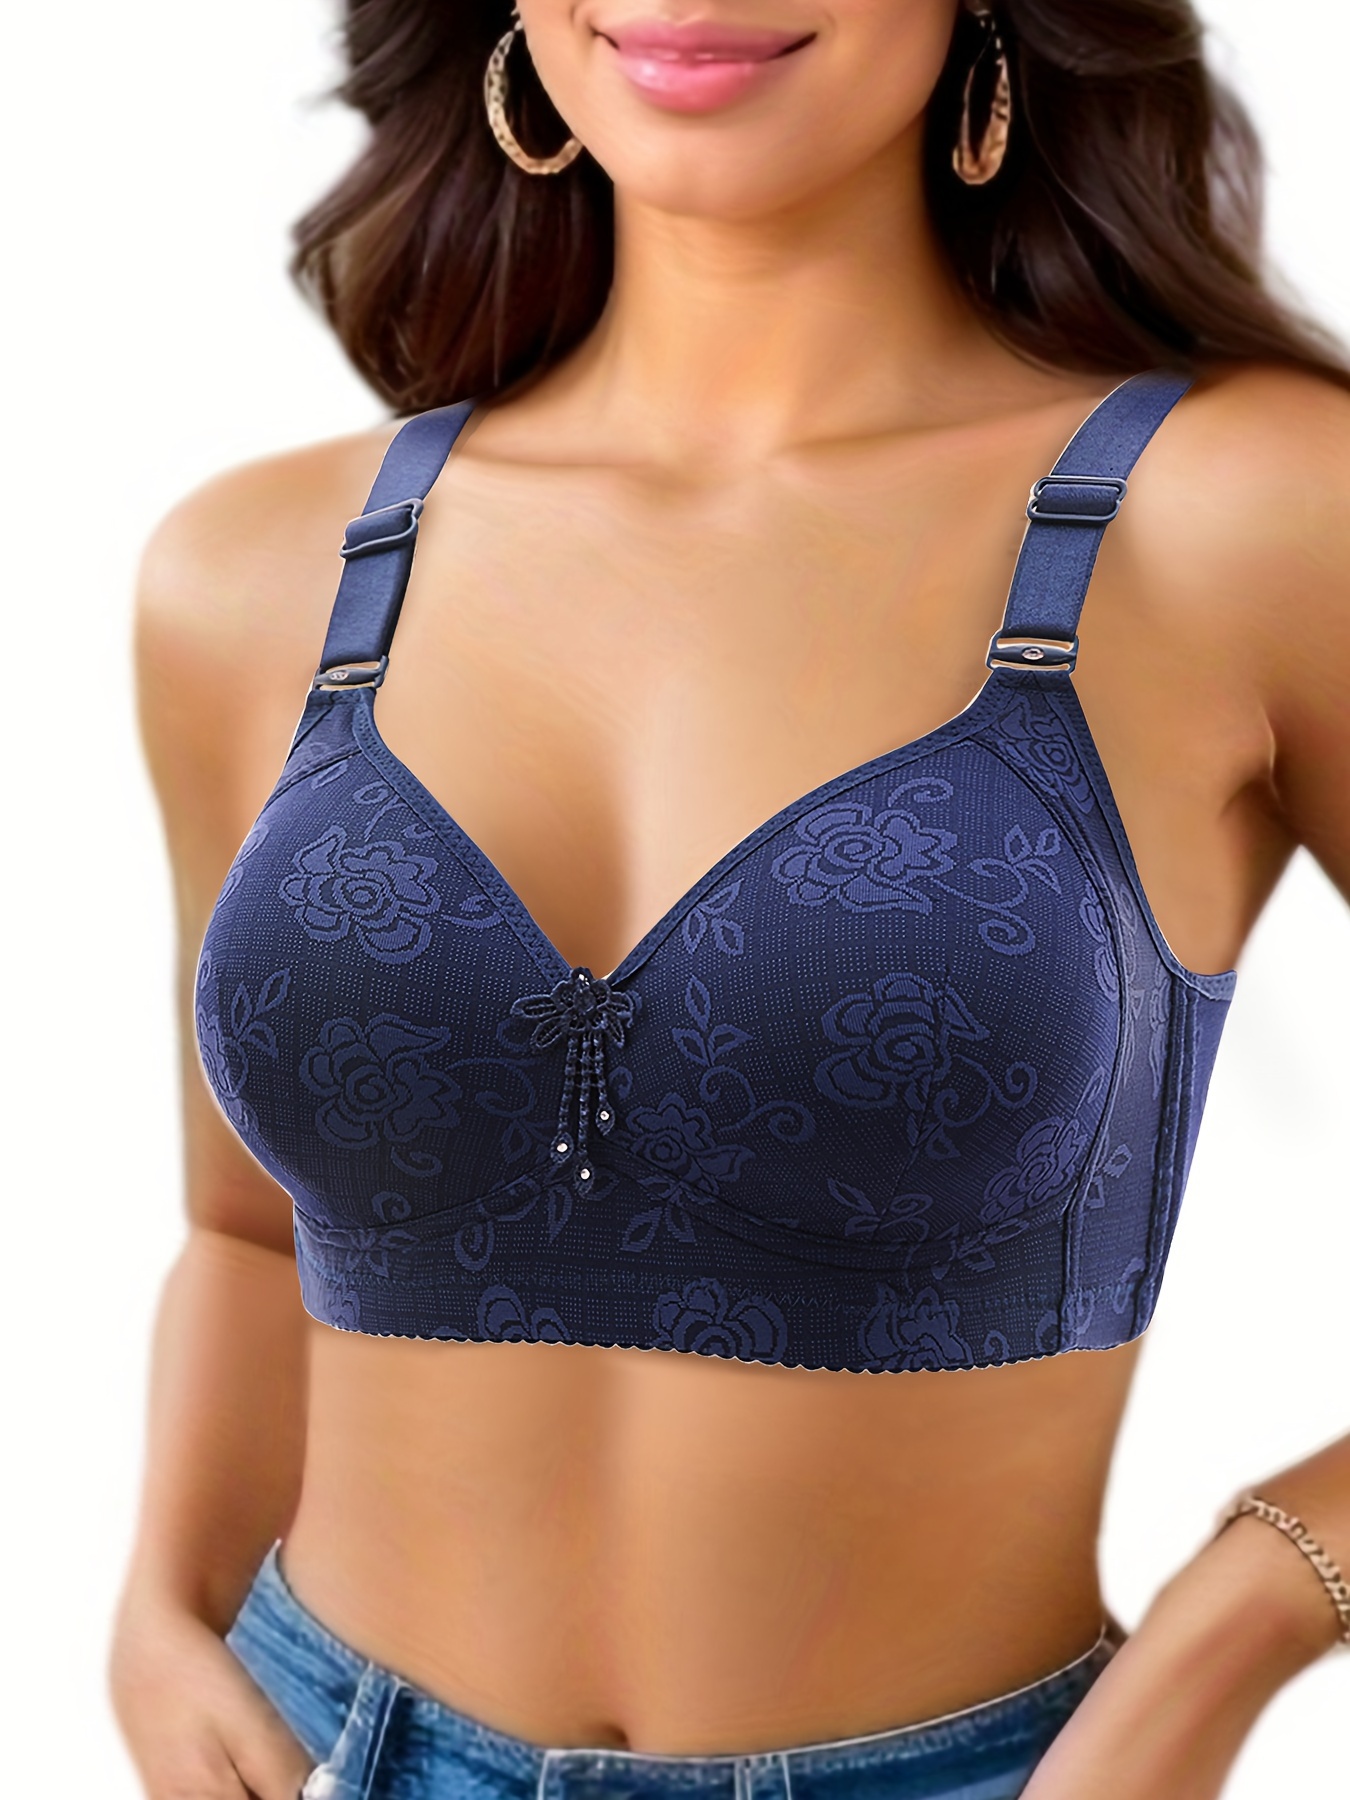 Xiaojmake Wireless Full Figure Padded Bras Seamless Minimizer Push Up Bra  Lace Mesh Desire Convertible Daily Brassiere Green at  Women's  Clothing store